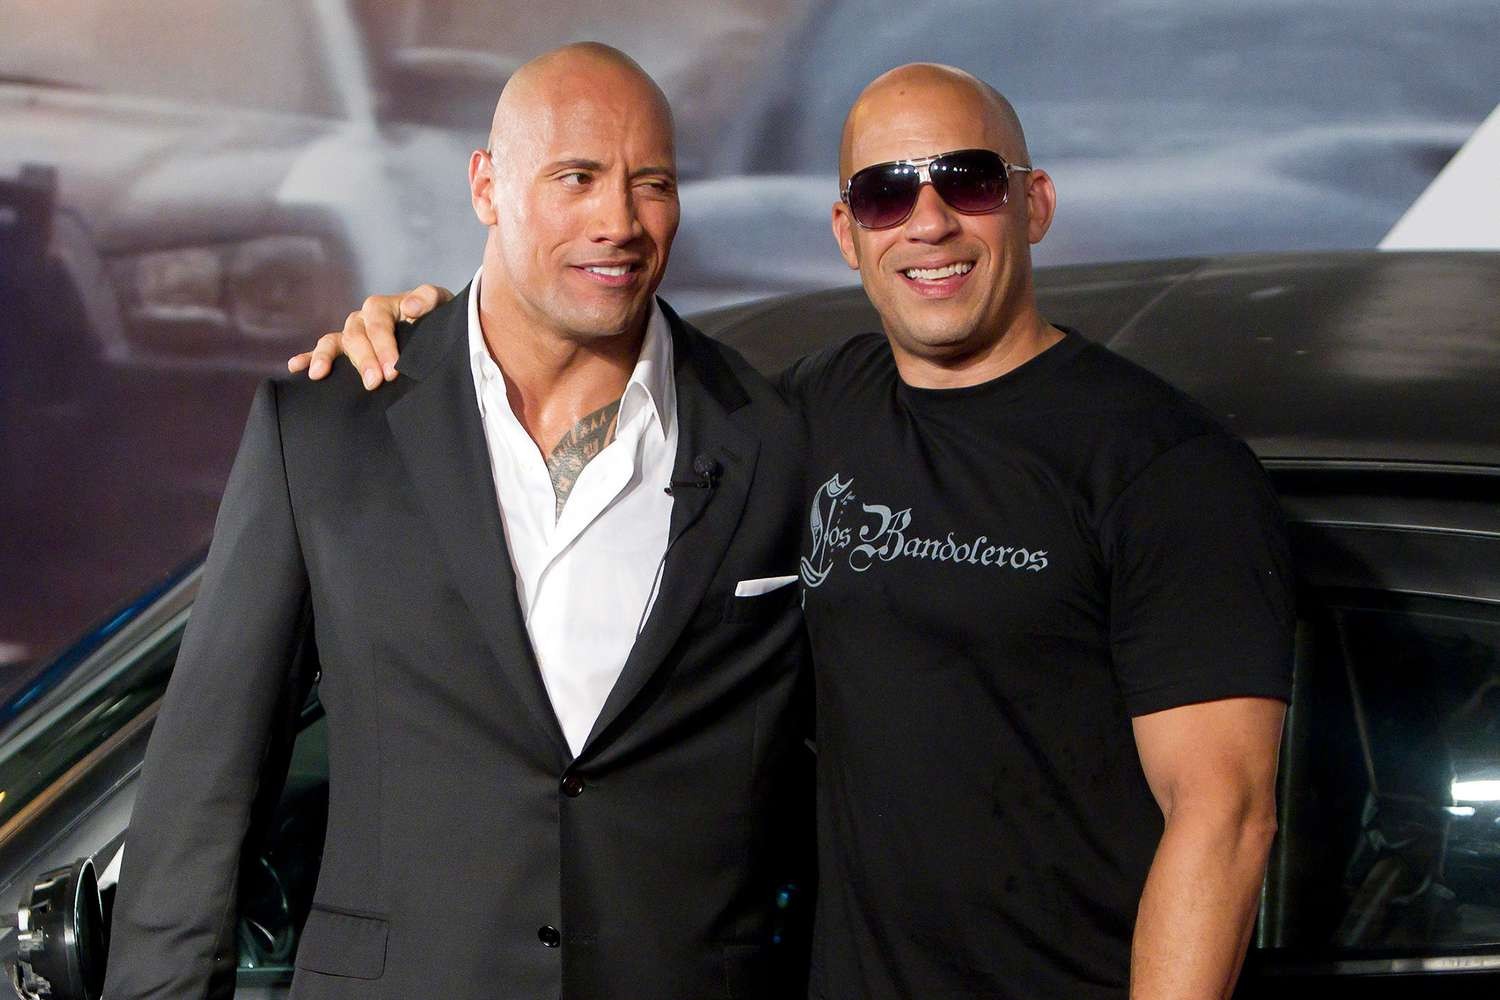 Dwayne Johnson and Vin Diesel were involved in a major public feud